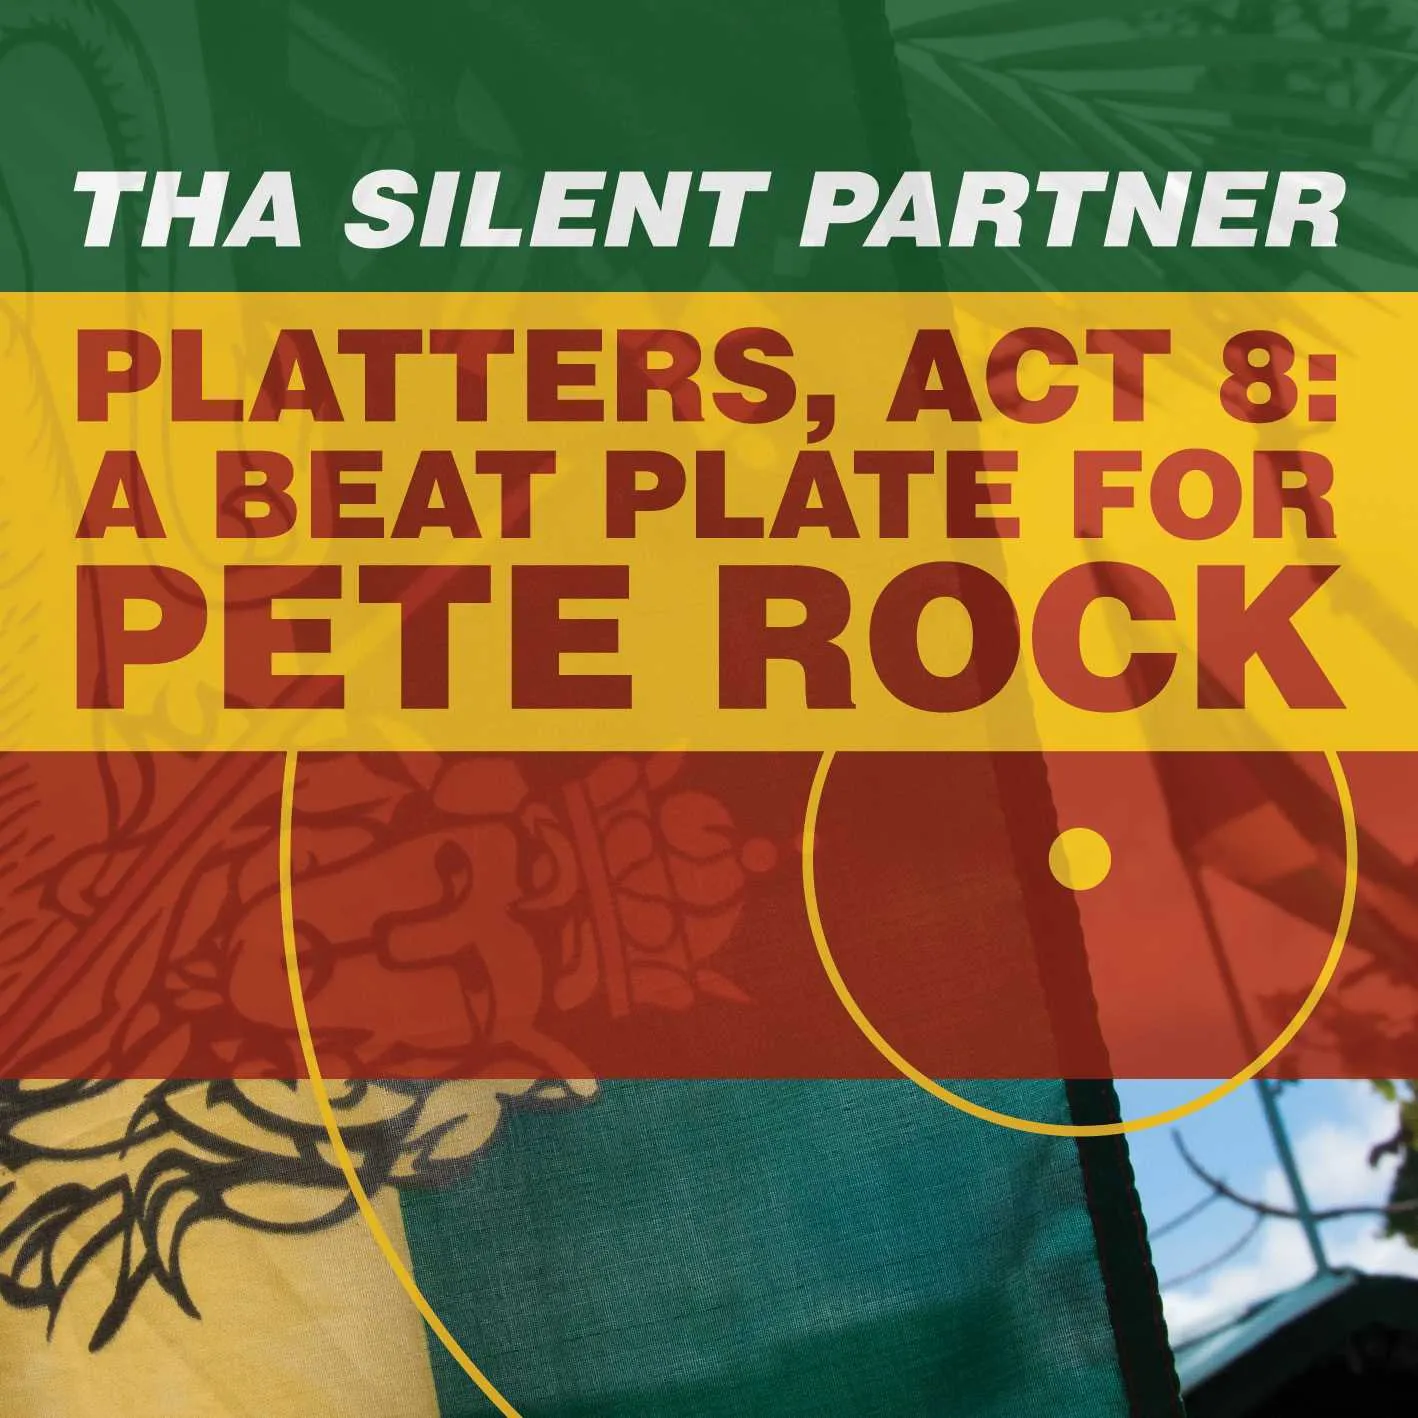 Album cover for “Platters, Act 8: A Beat Plate For Pete Rock” by Tha Silent Partner